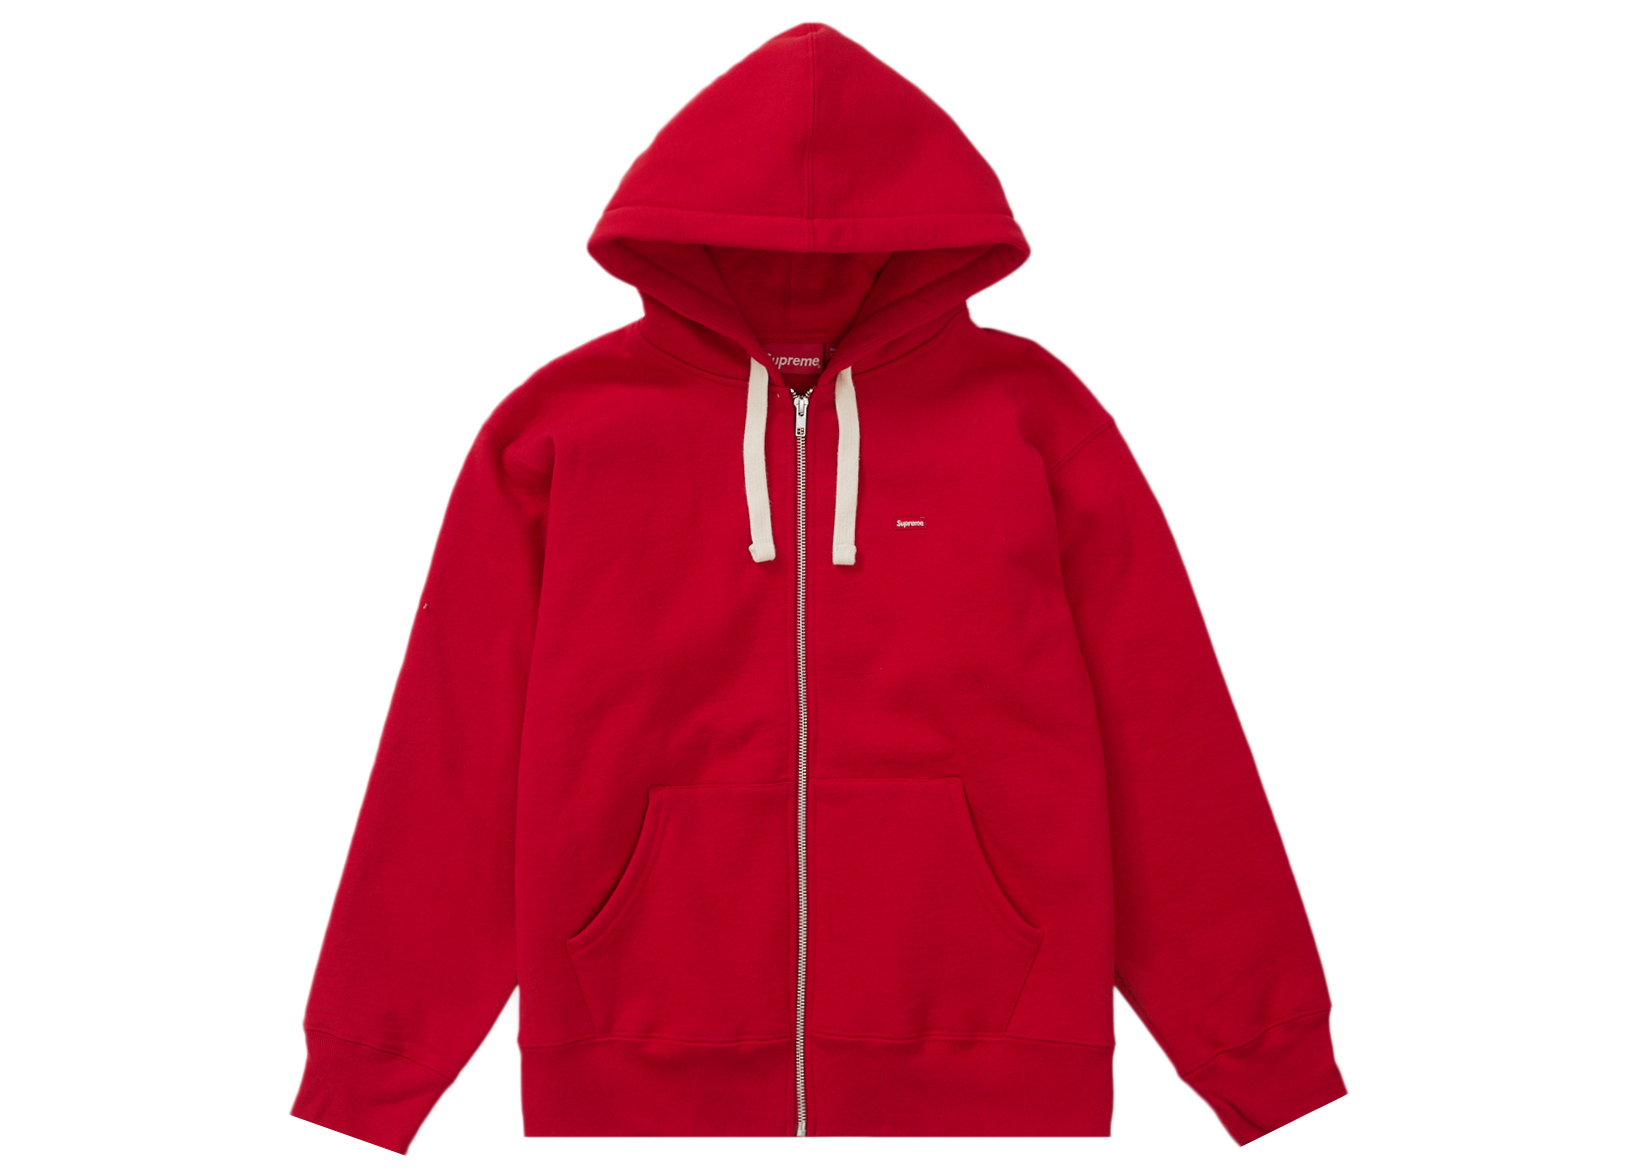 Supreme Small Box Thermal Zip Up Hoodie Red Men's - FW16 - US